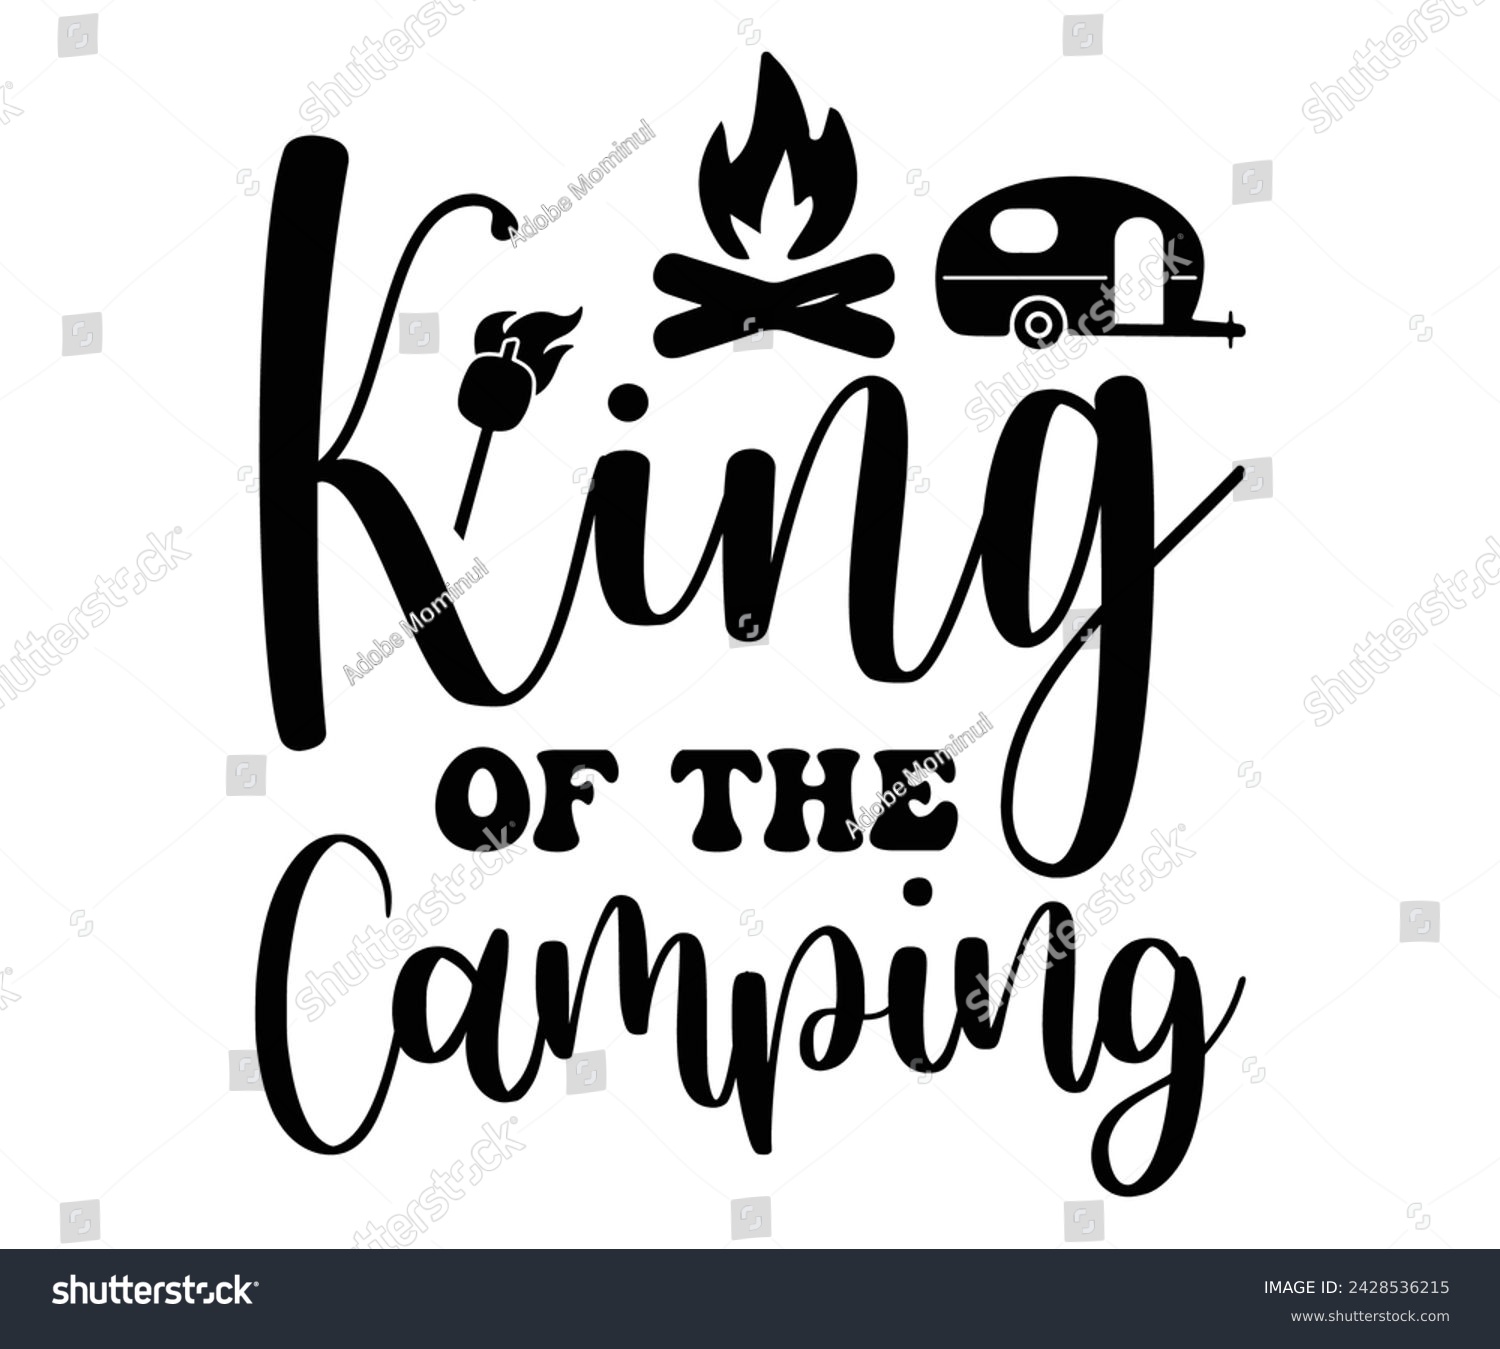 SVG of King Of The Camping Svg,Happy Camper Svg,Camping Svg,Adventure Svg,Hiking Svg,Camp Saying,Camp Life Svg,Svg Cut Files, Png,Mountain T-shirt,Instant Download svg